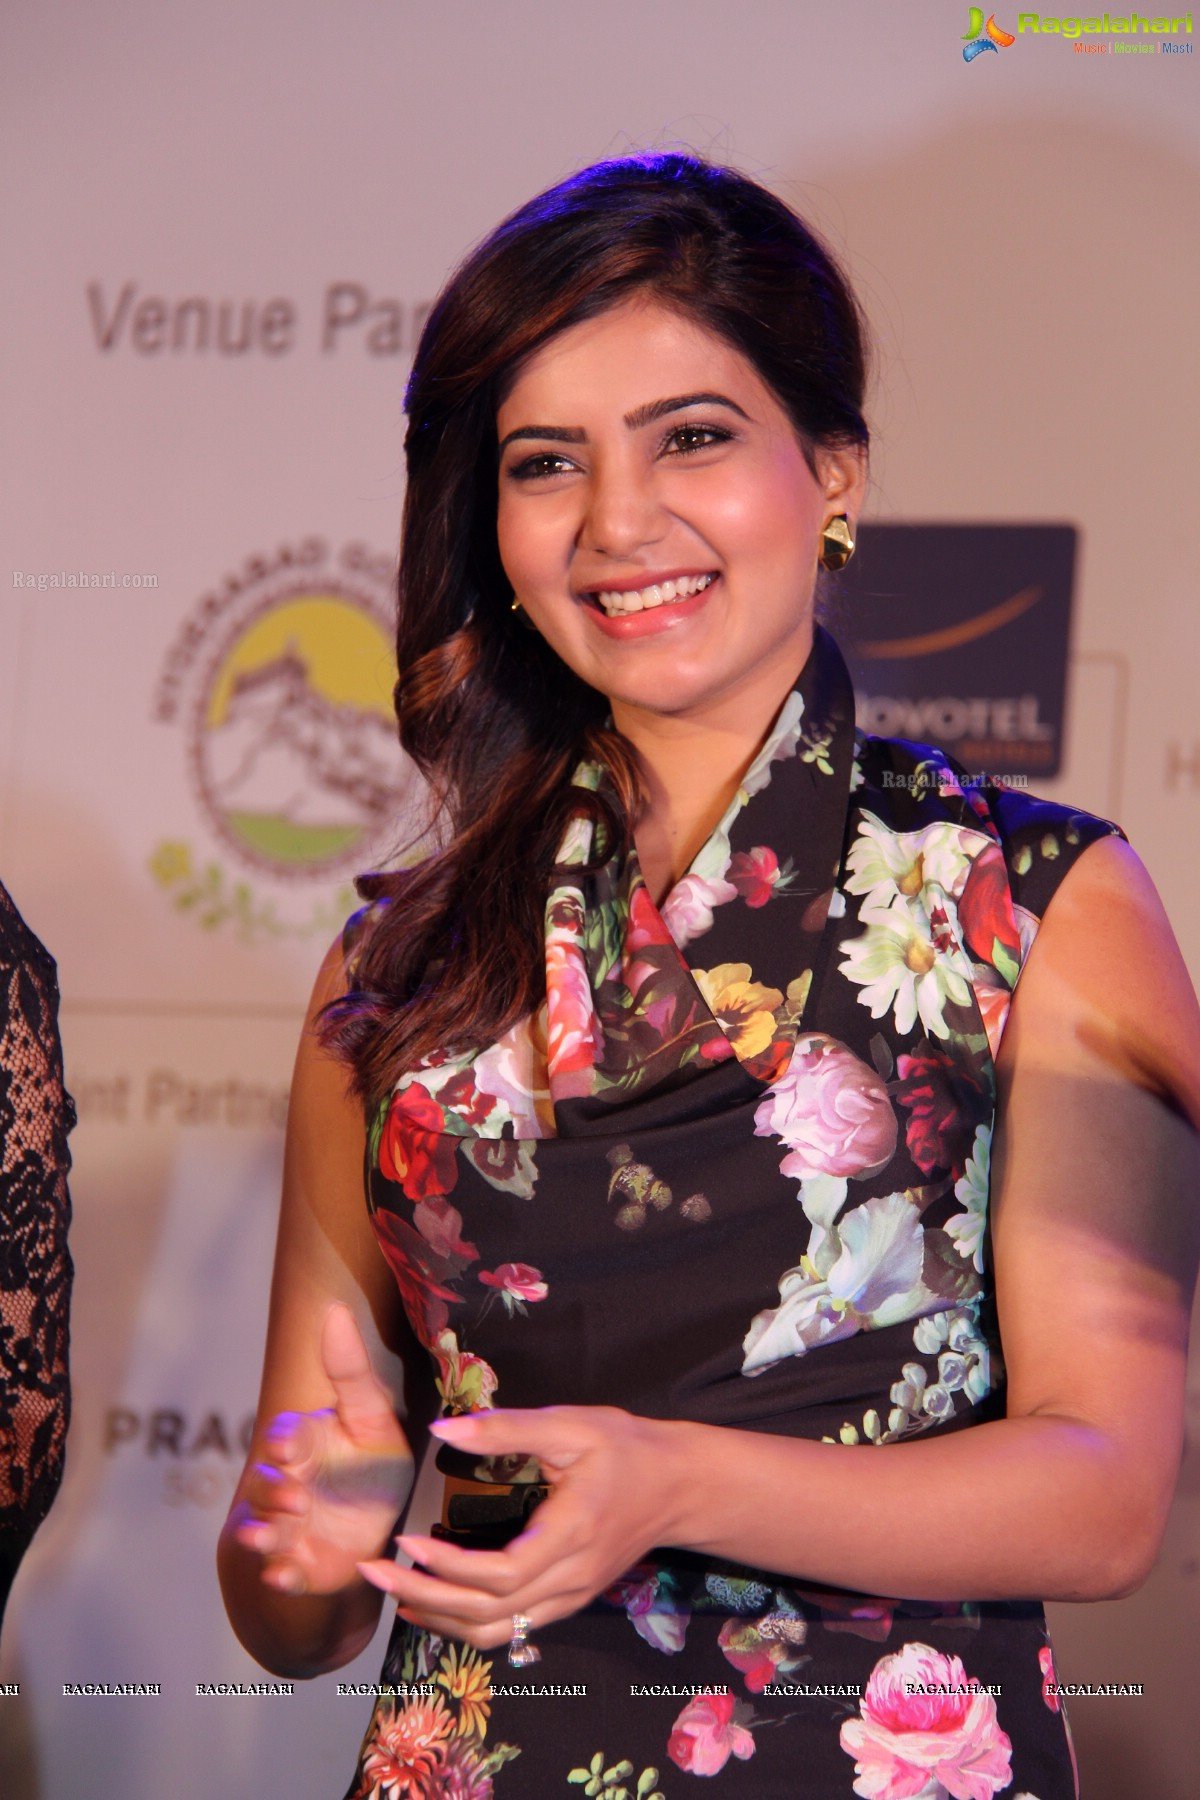 Samantha at Cancer Crusaders Invitation Cup Celebrity Playoff 2014